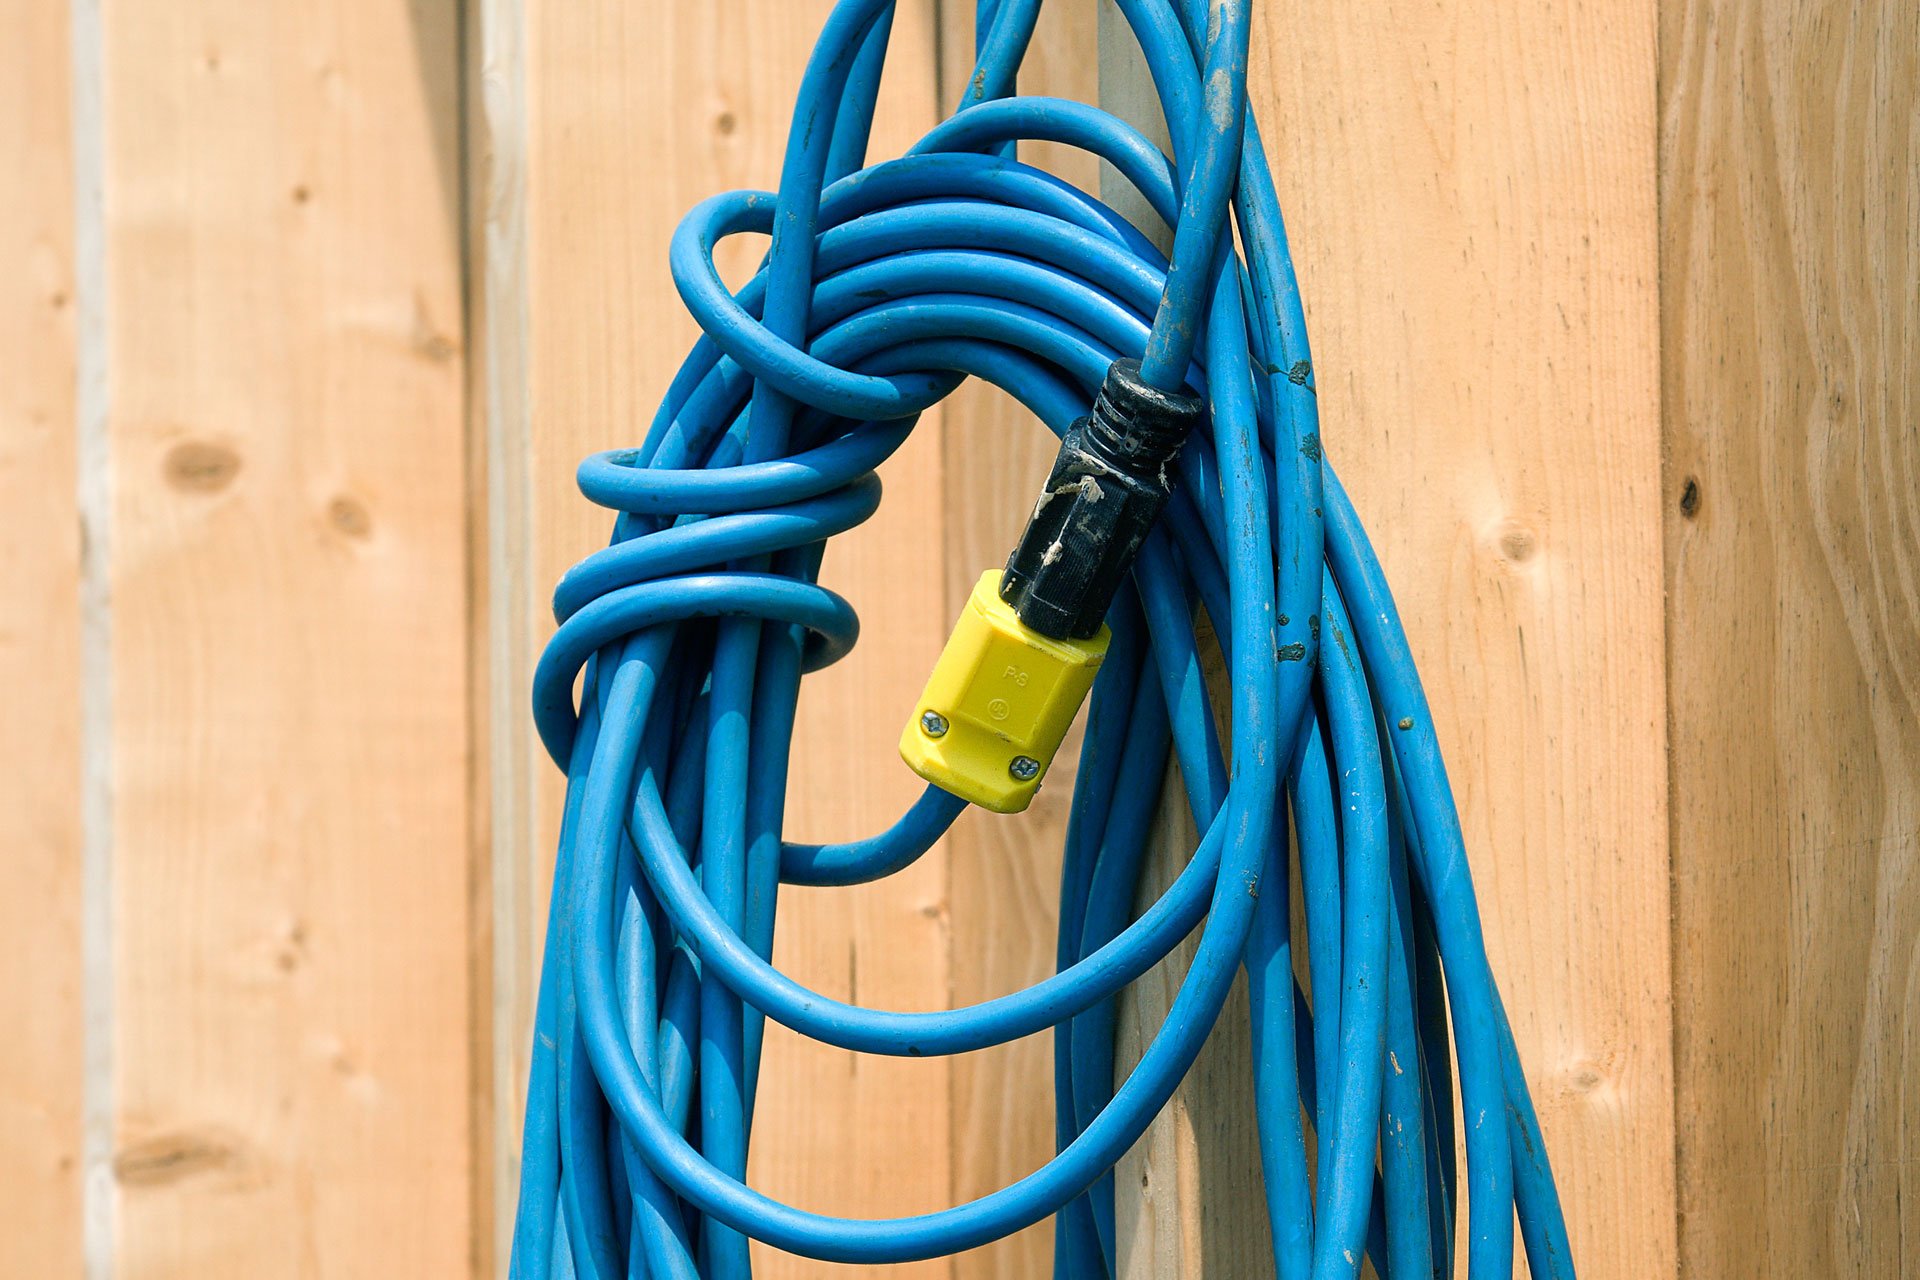 Outdoor Electric Cords - Are They Safe in Rain & Snow? - Shipley